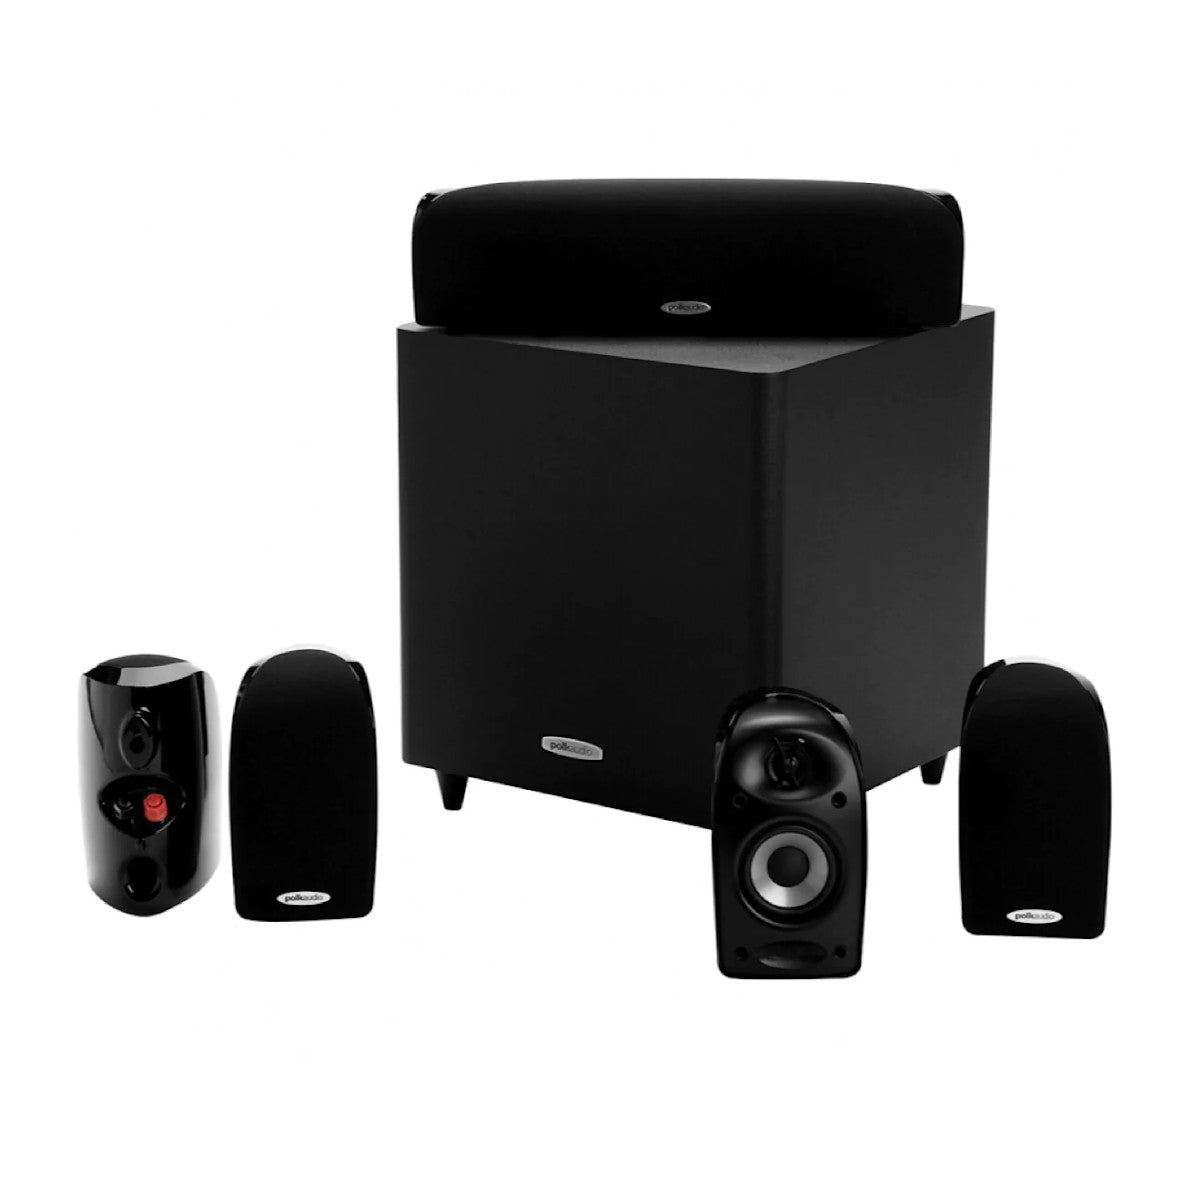 Polk Audio TL1600 5.1 Channel Home Theater Speaker System - Ooberpad